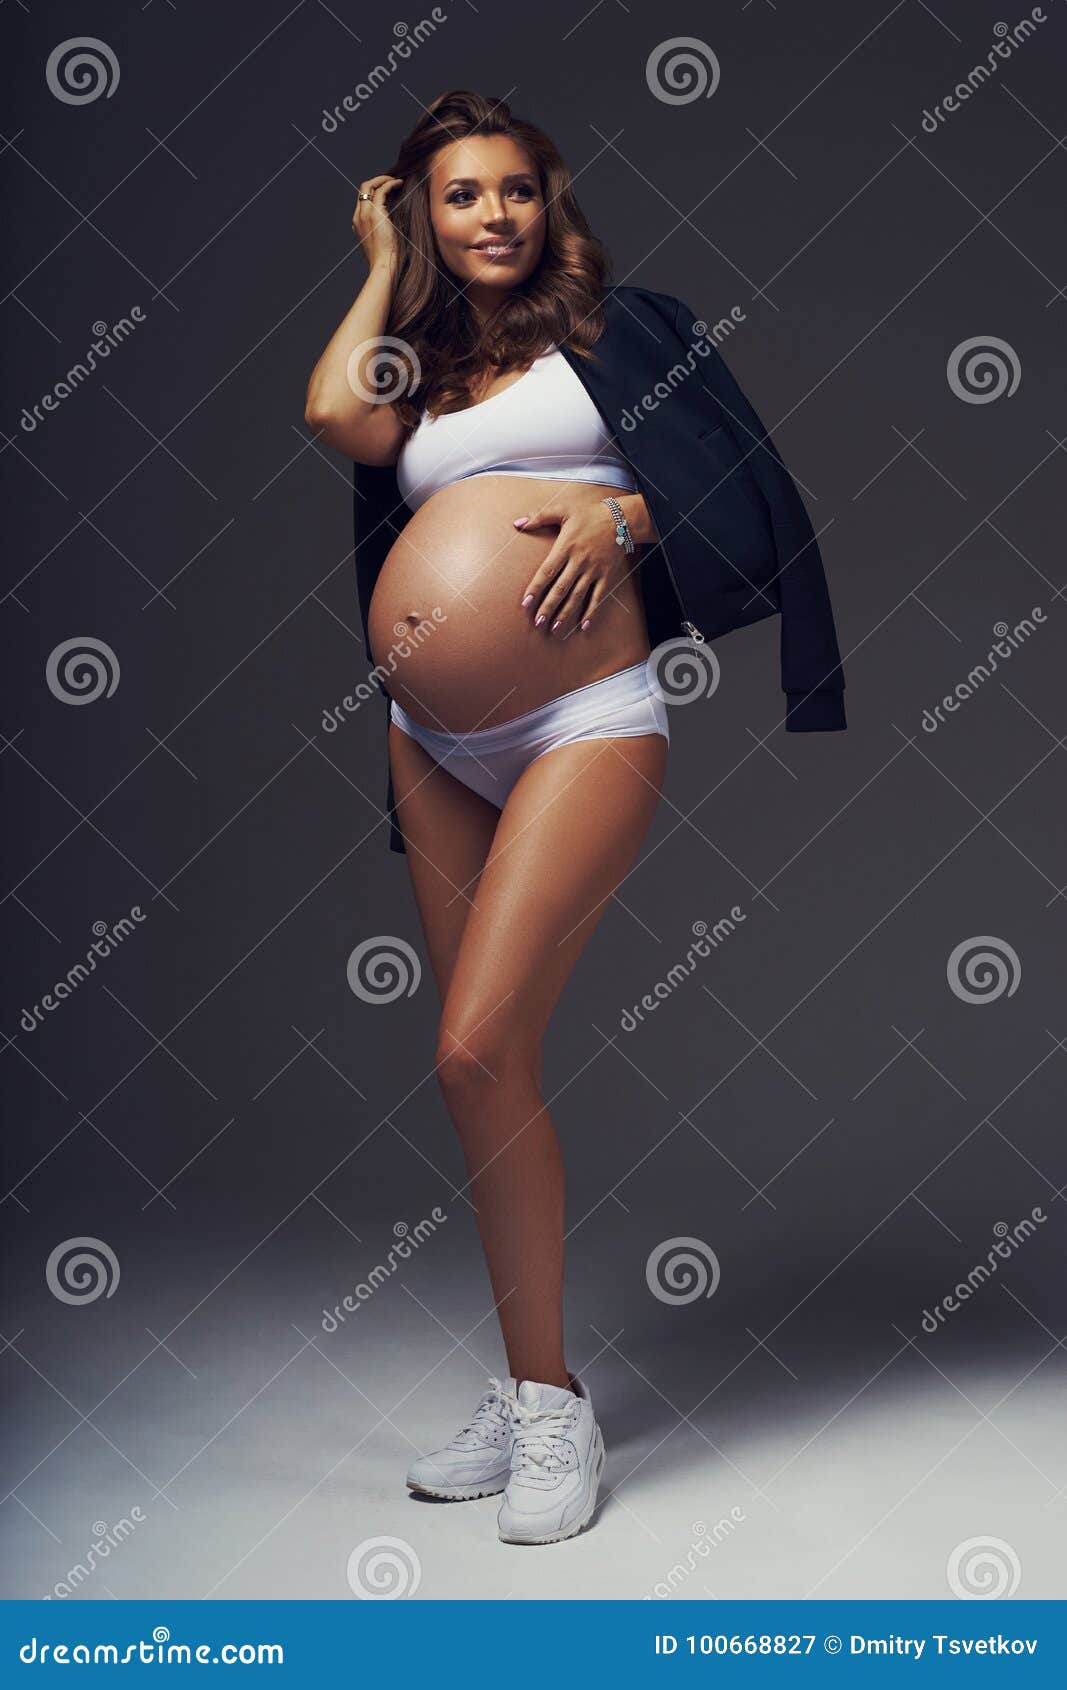 Pregnant Female Model in Sports Underwear Standing and Posing